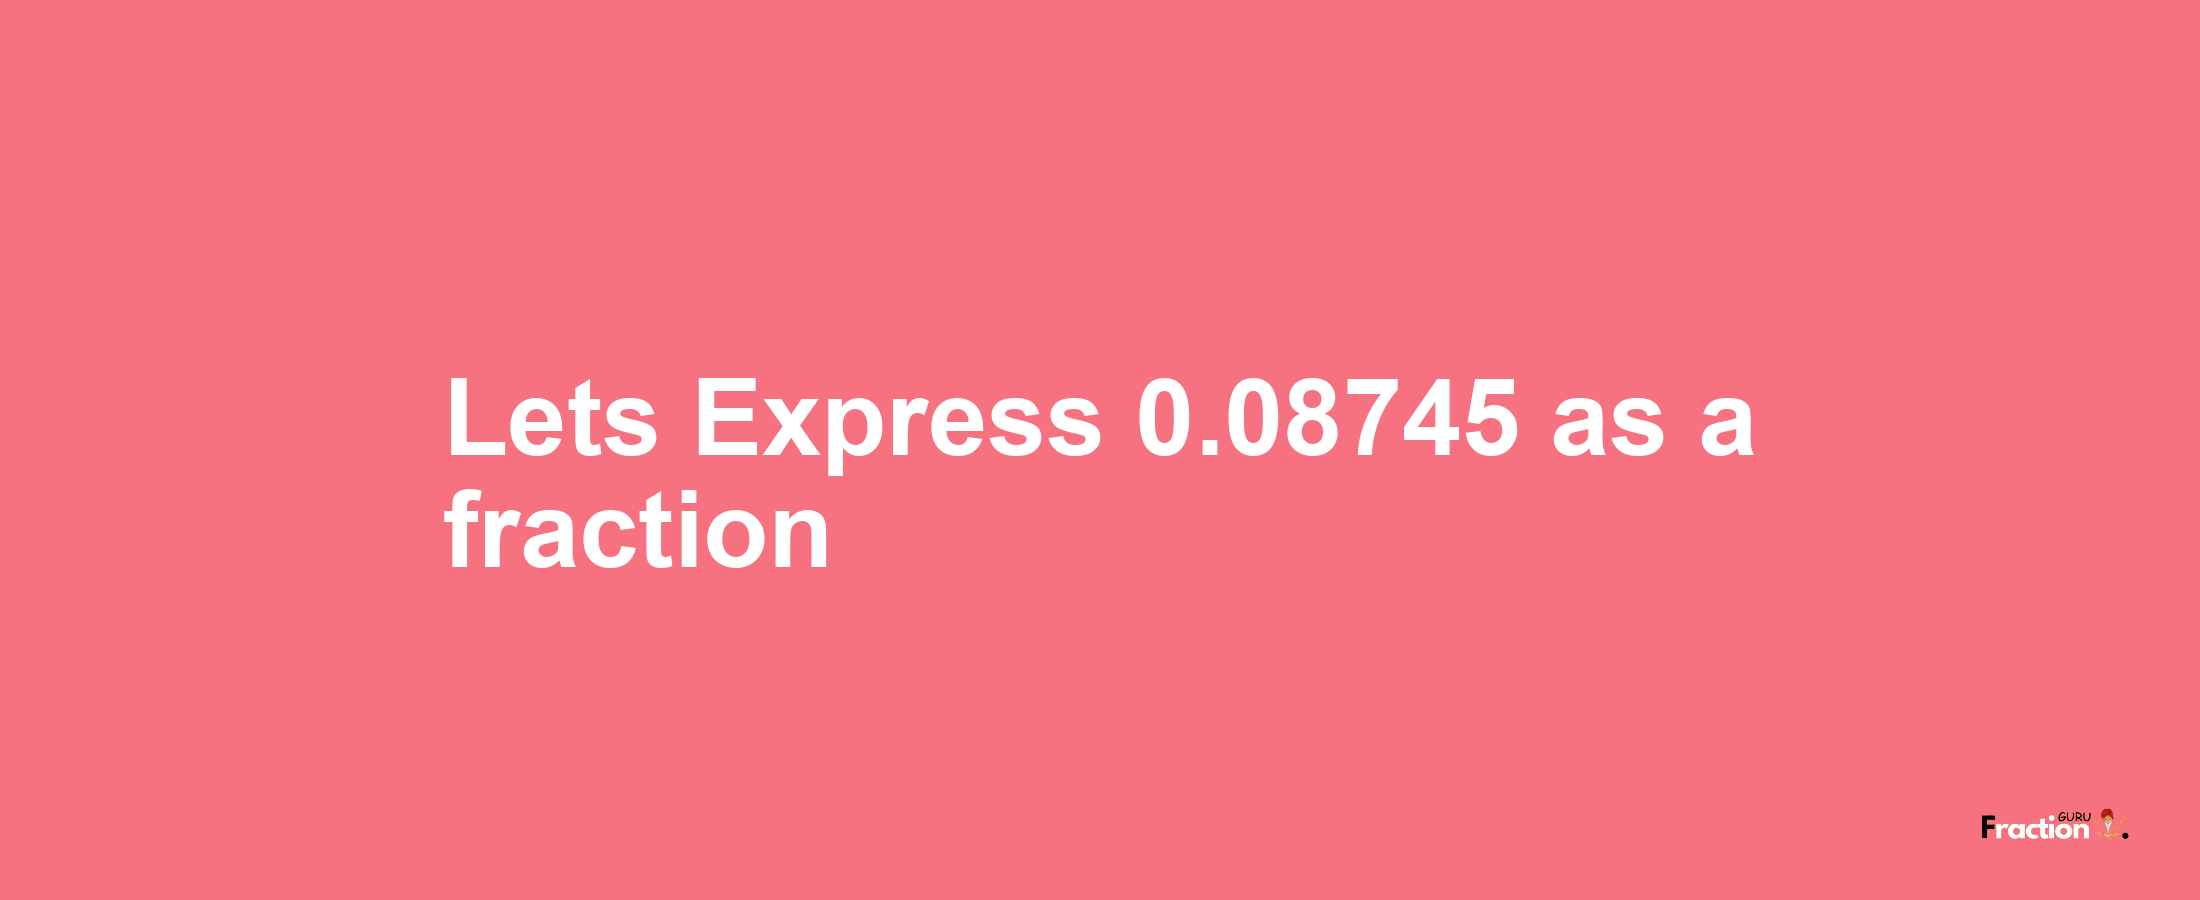 Lets Express 0.08745 as afraction